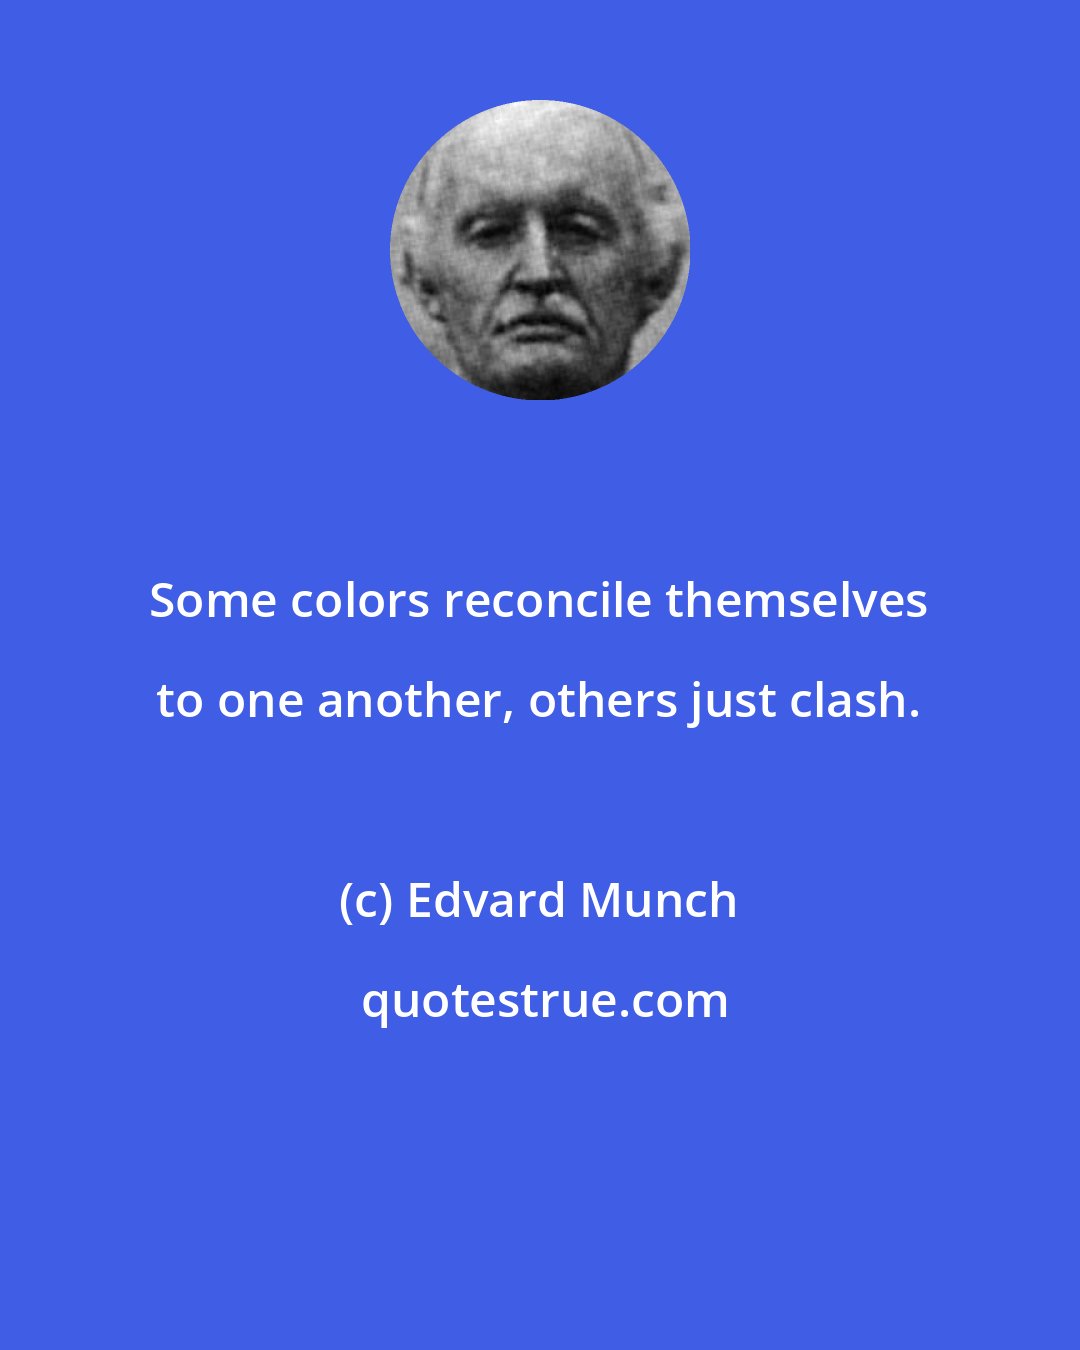 Edvard Munch: Some colors reconcile themselves to one another, others just clash.